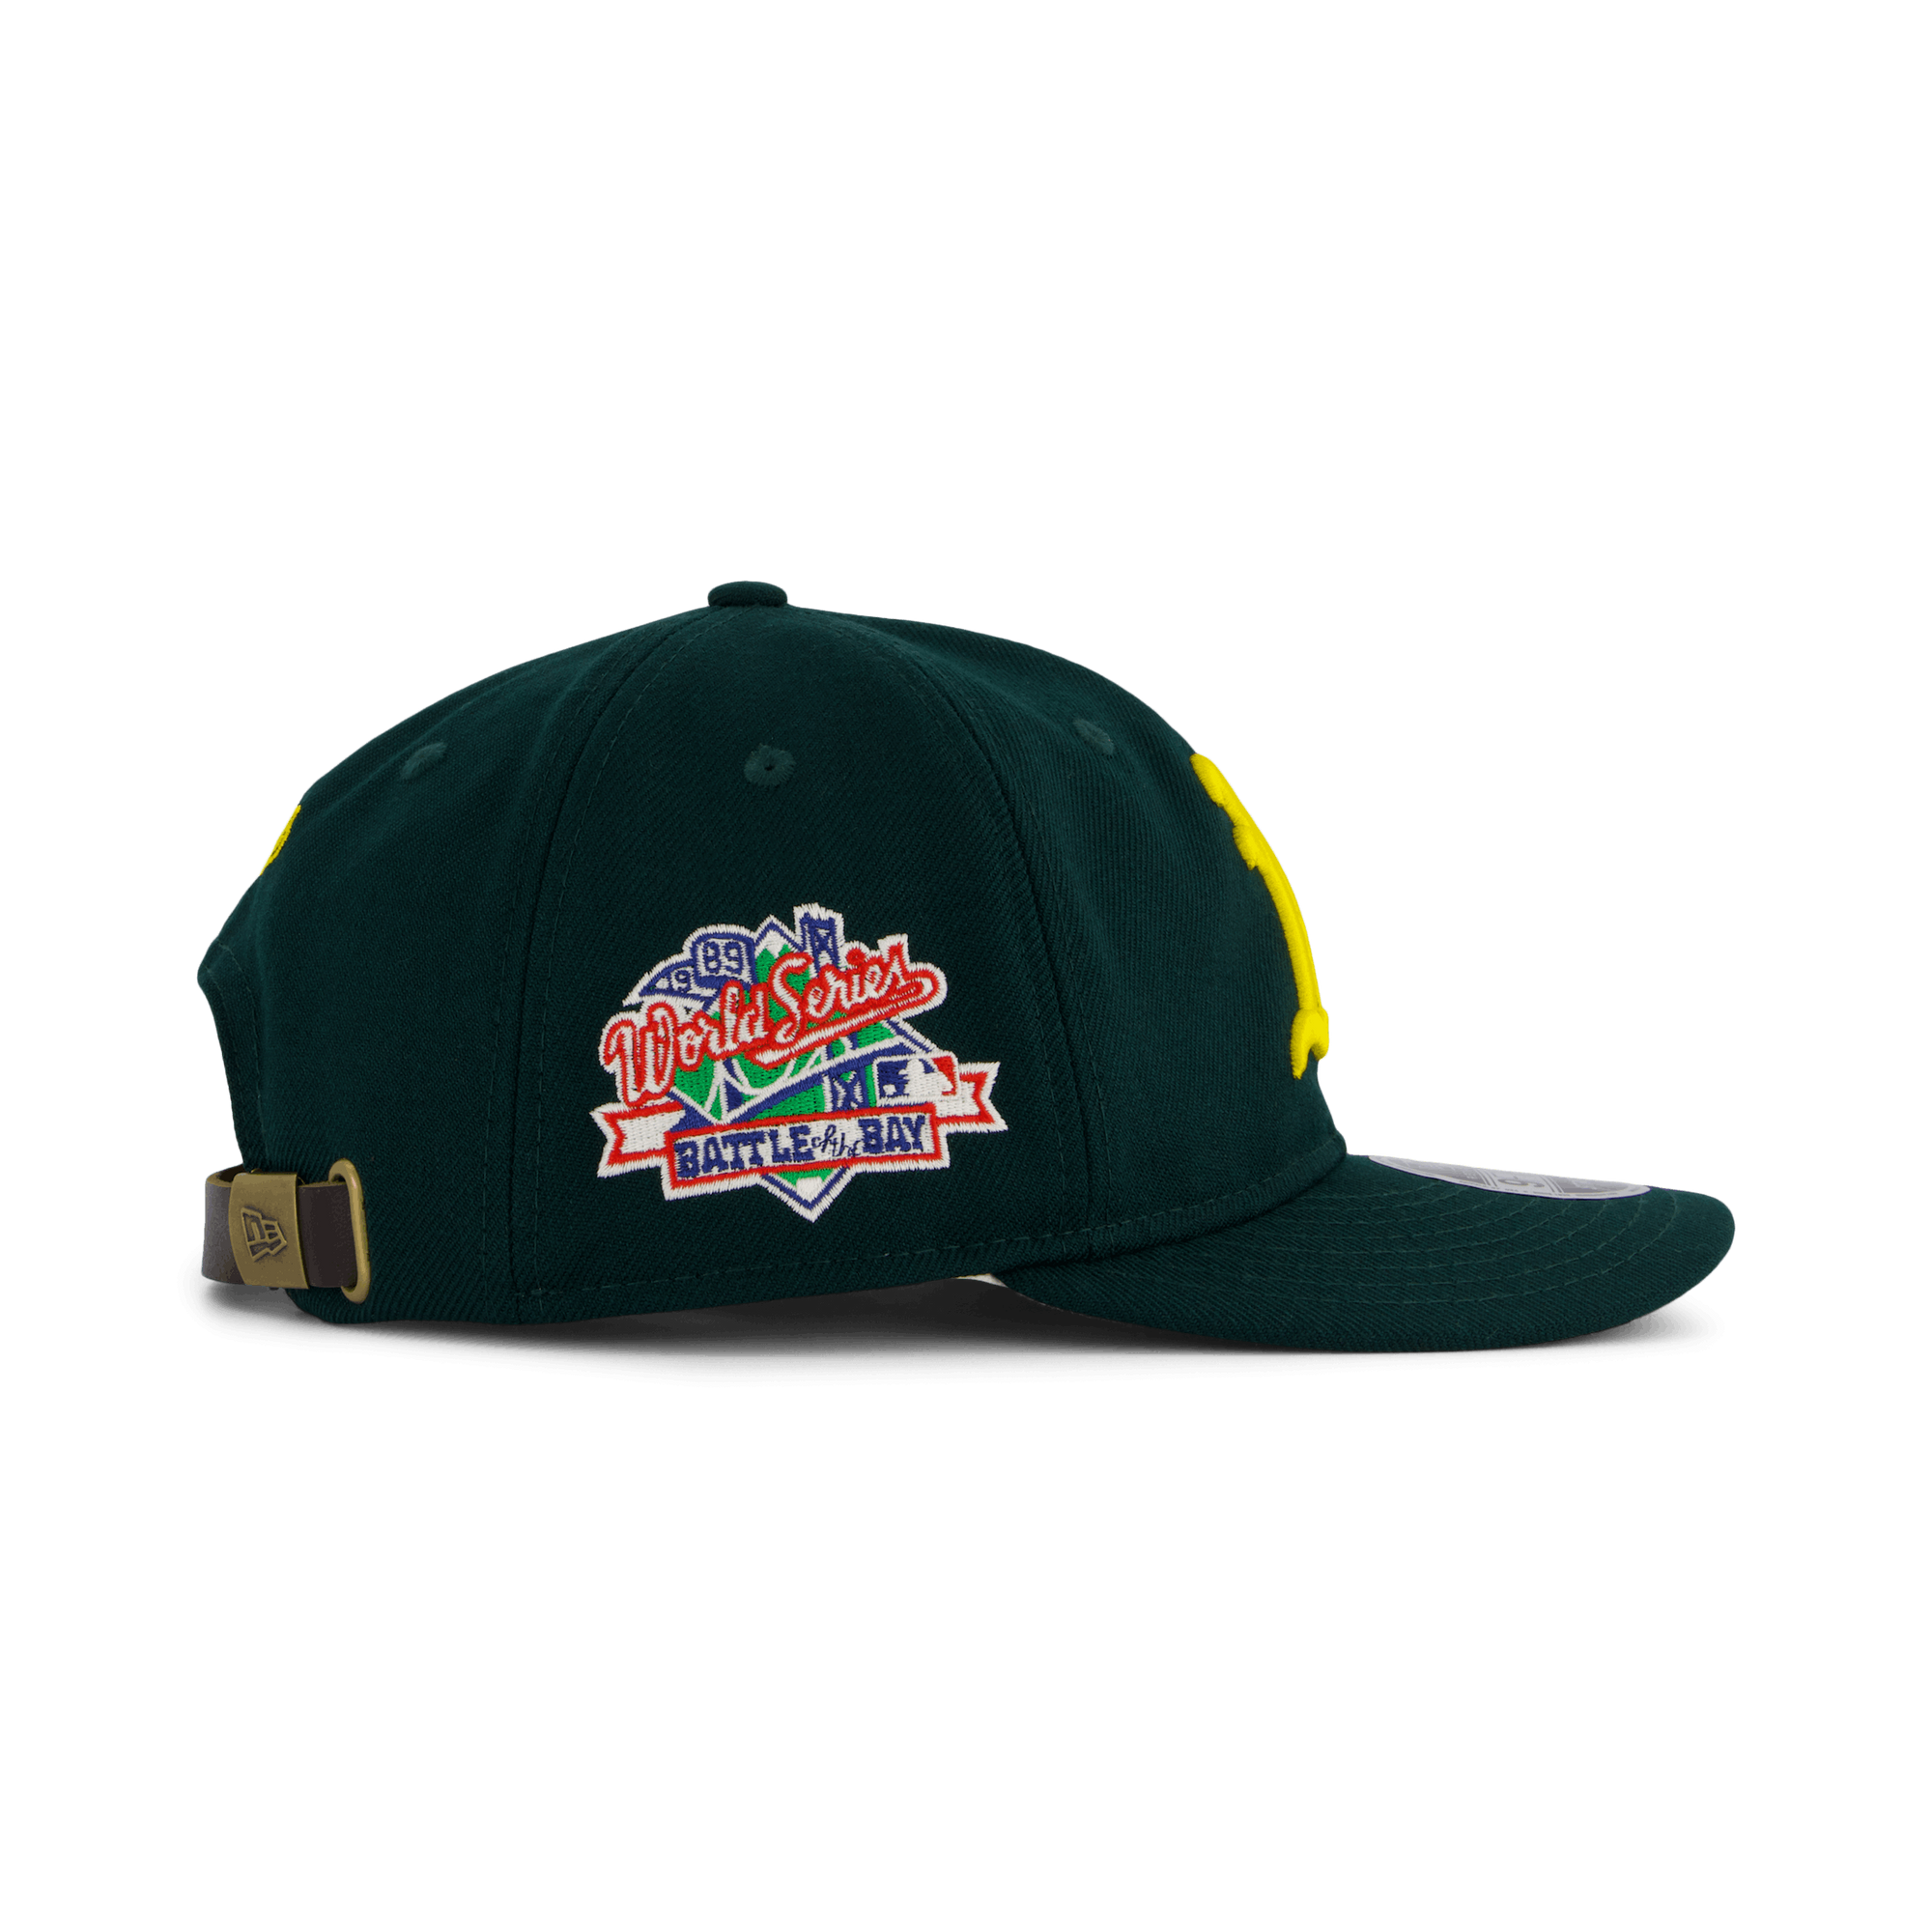 Coops S Patch 9fifty Rc Athlet Dkgagd